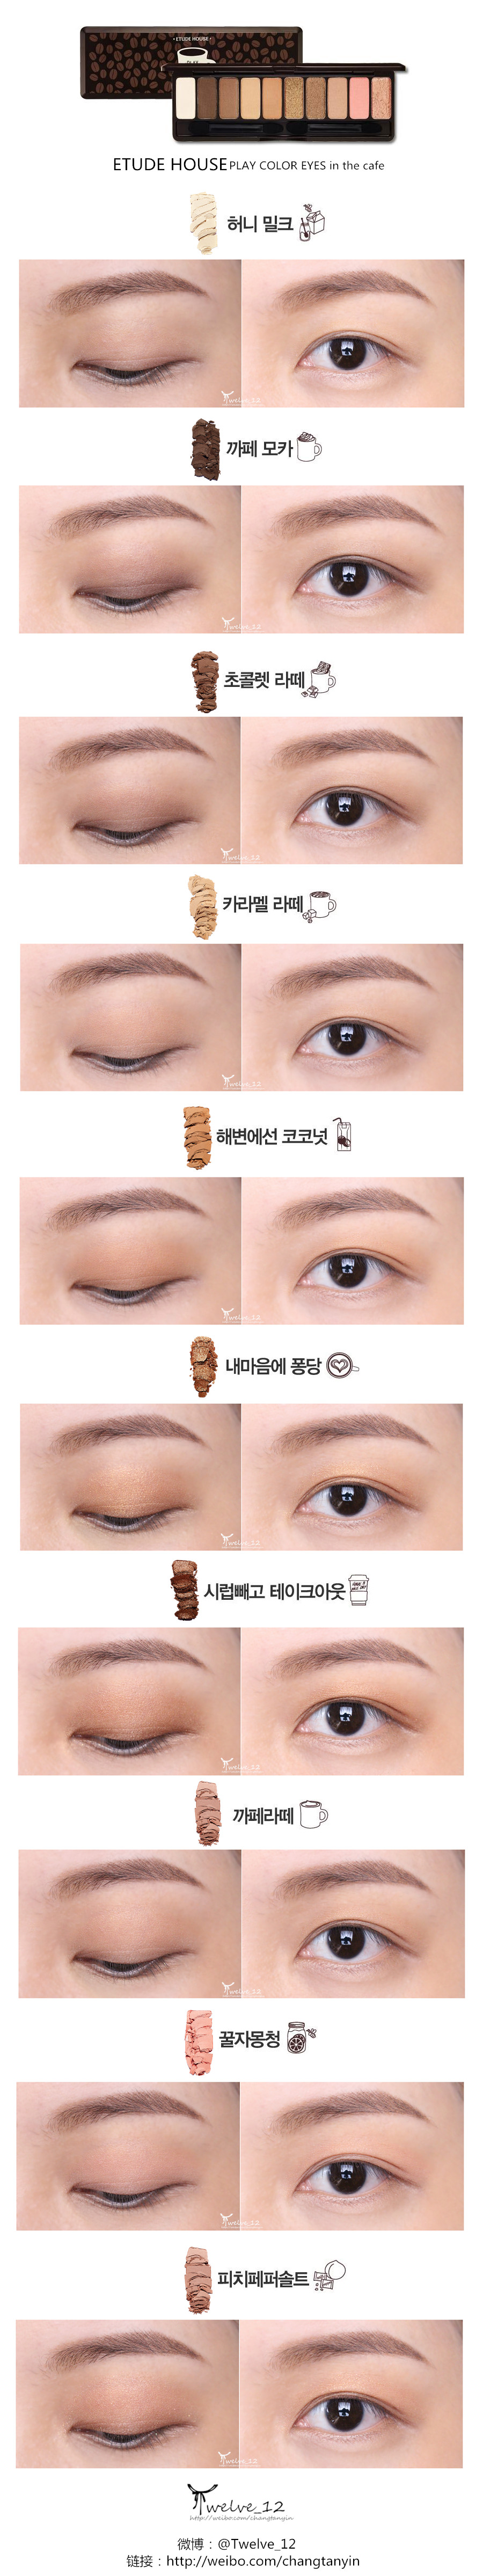 ETUDE HOUSE PLAY COLOR EYES in the cafe 爱丽小屋/伊蒂之屋十色眼影咖啡盘试色